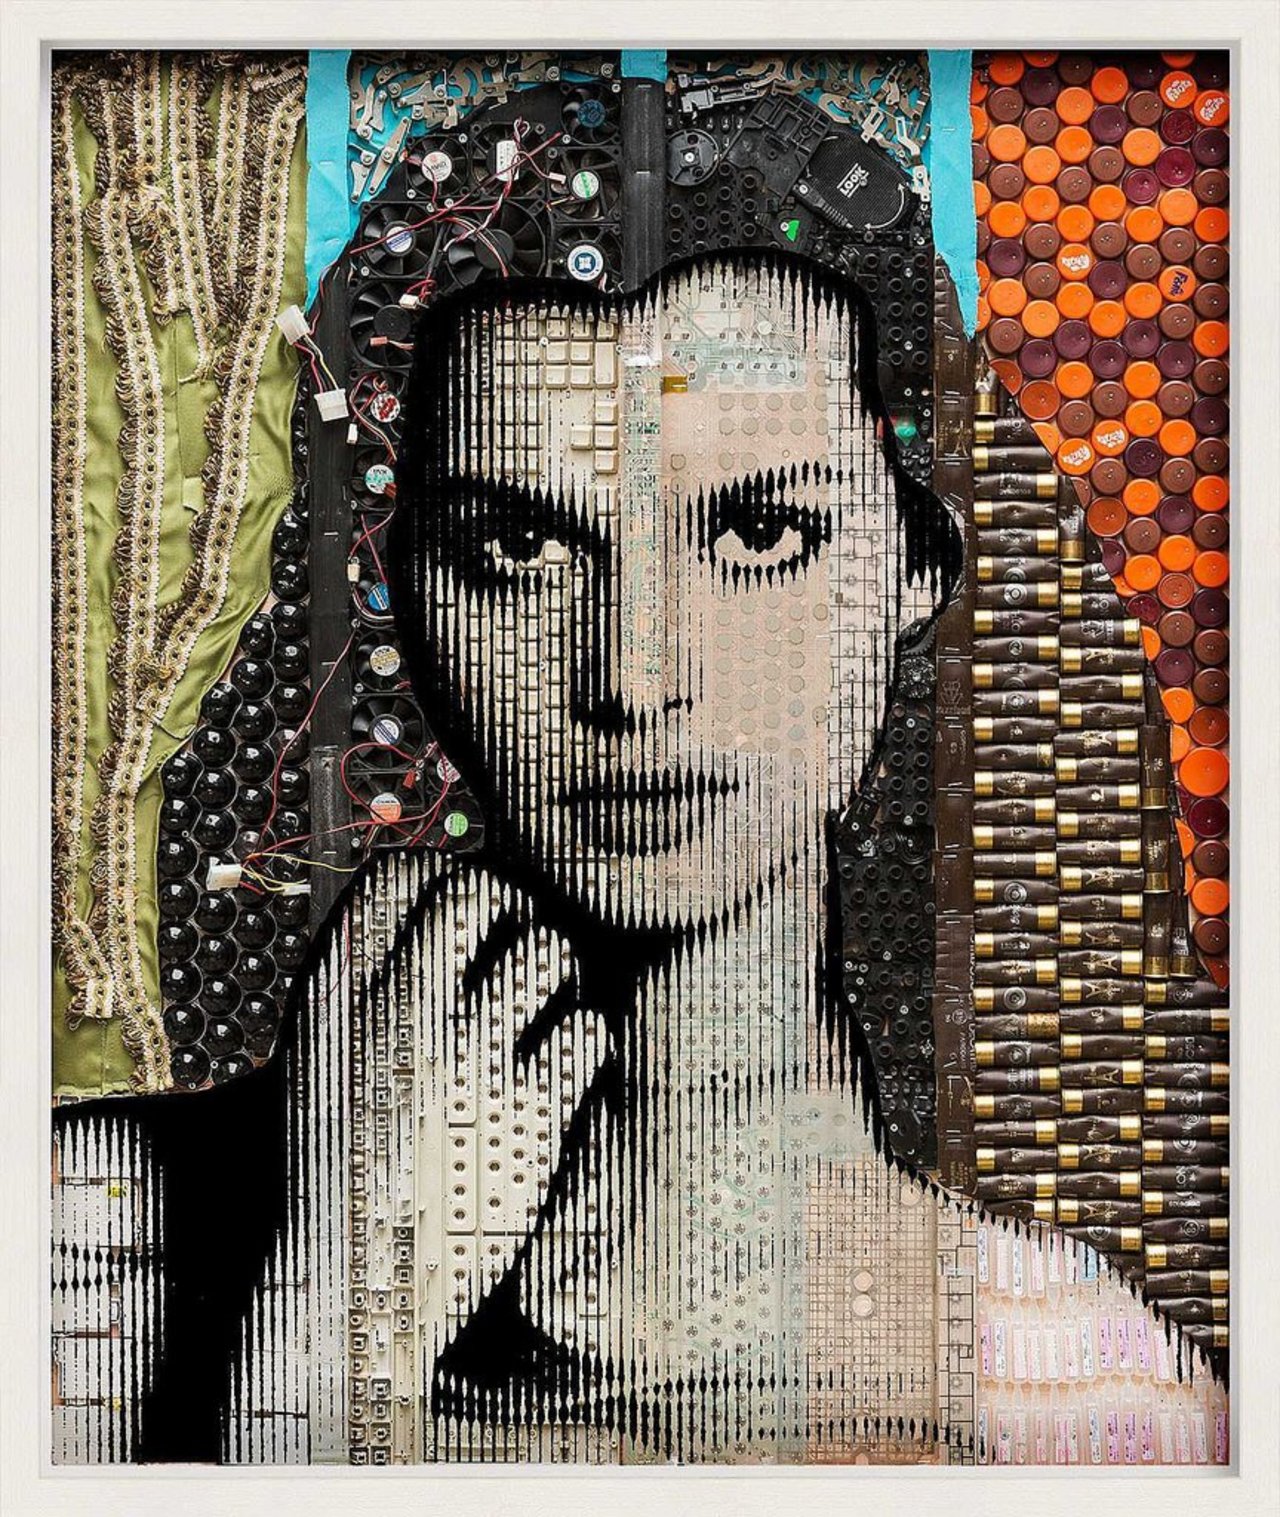 Renaud Delorme’s Unconventional Portraits of Modern Day Celebrities#PopArt #Recycling #Art https://t.co/r6G7ZsKV3e